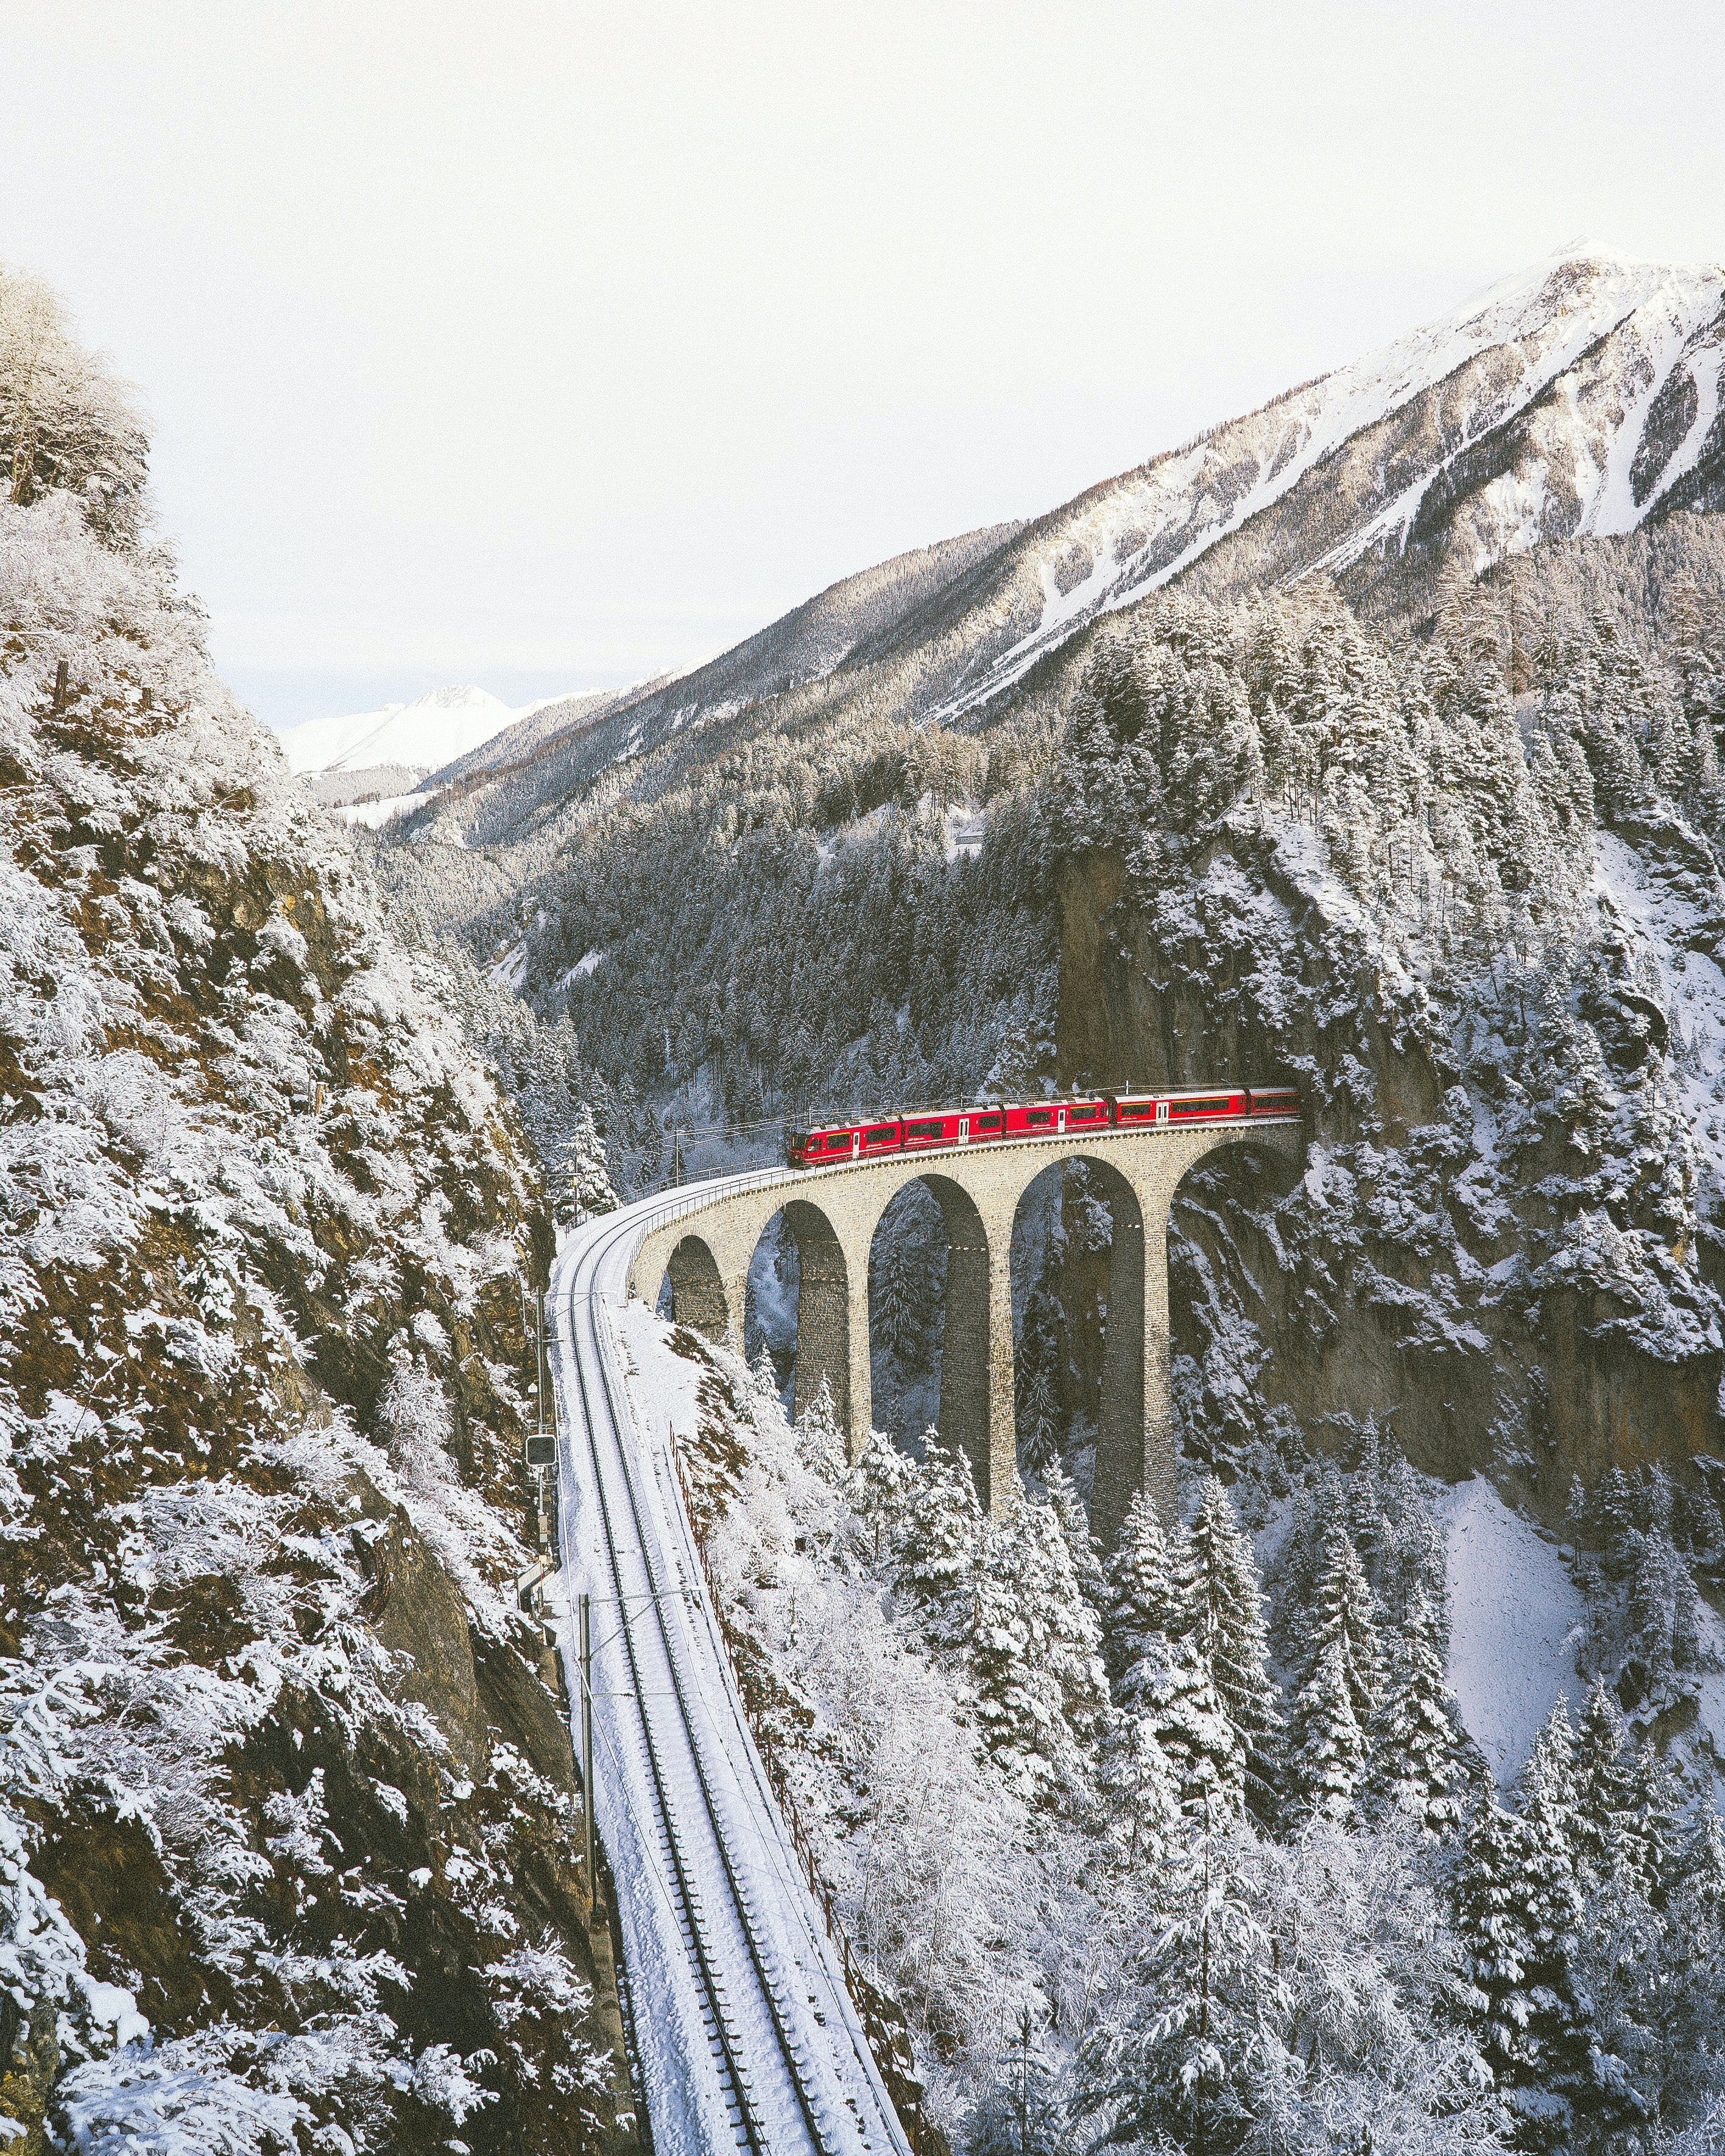 Swiss landscape under the snow with a train passing on the viaduct in the middle of the mountains. Photo by Johannes Hofmann